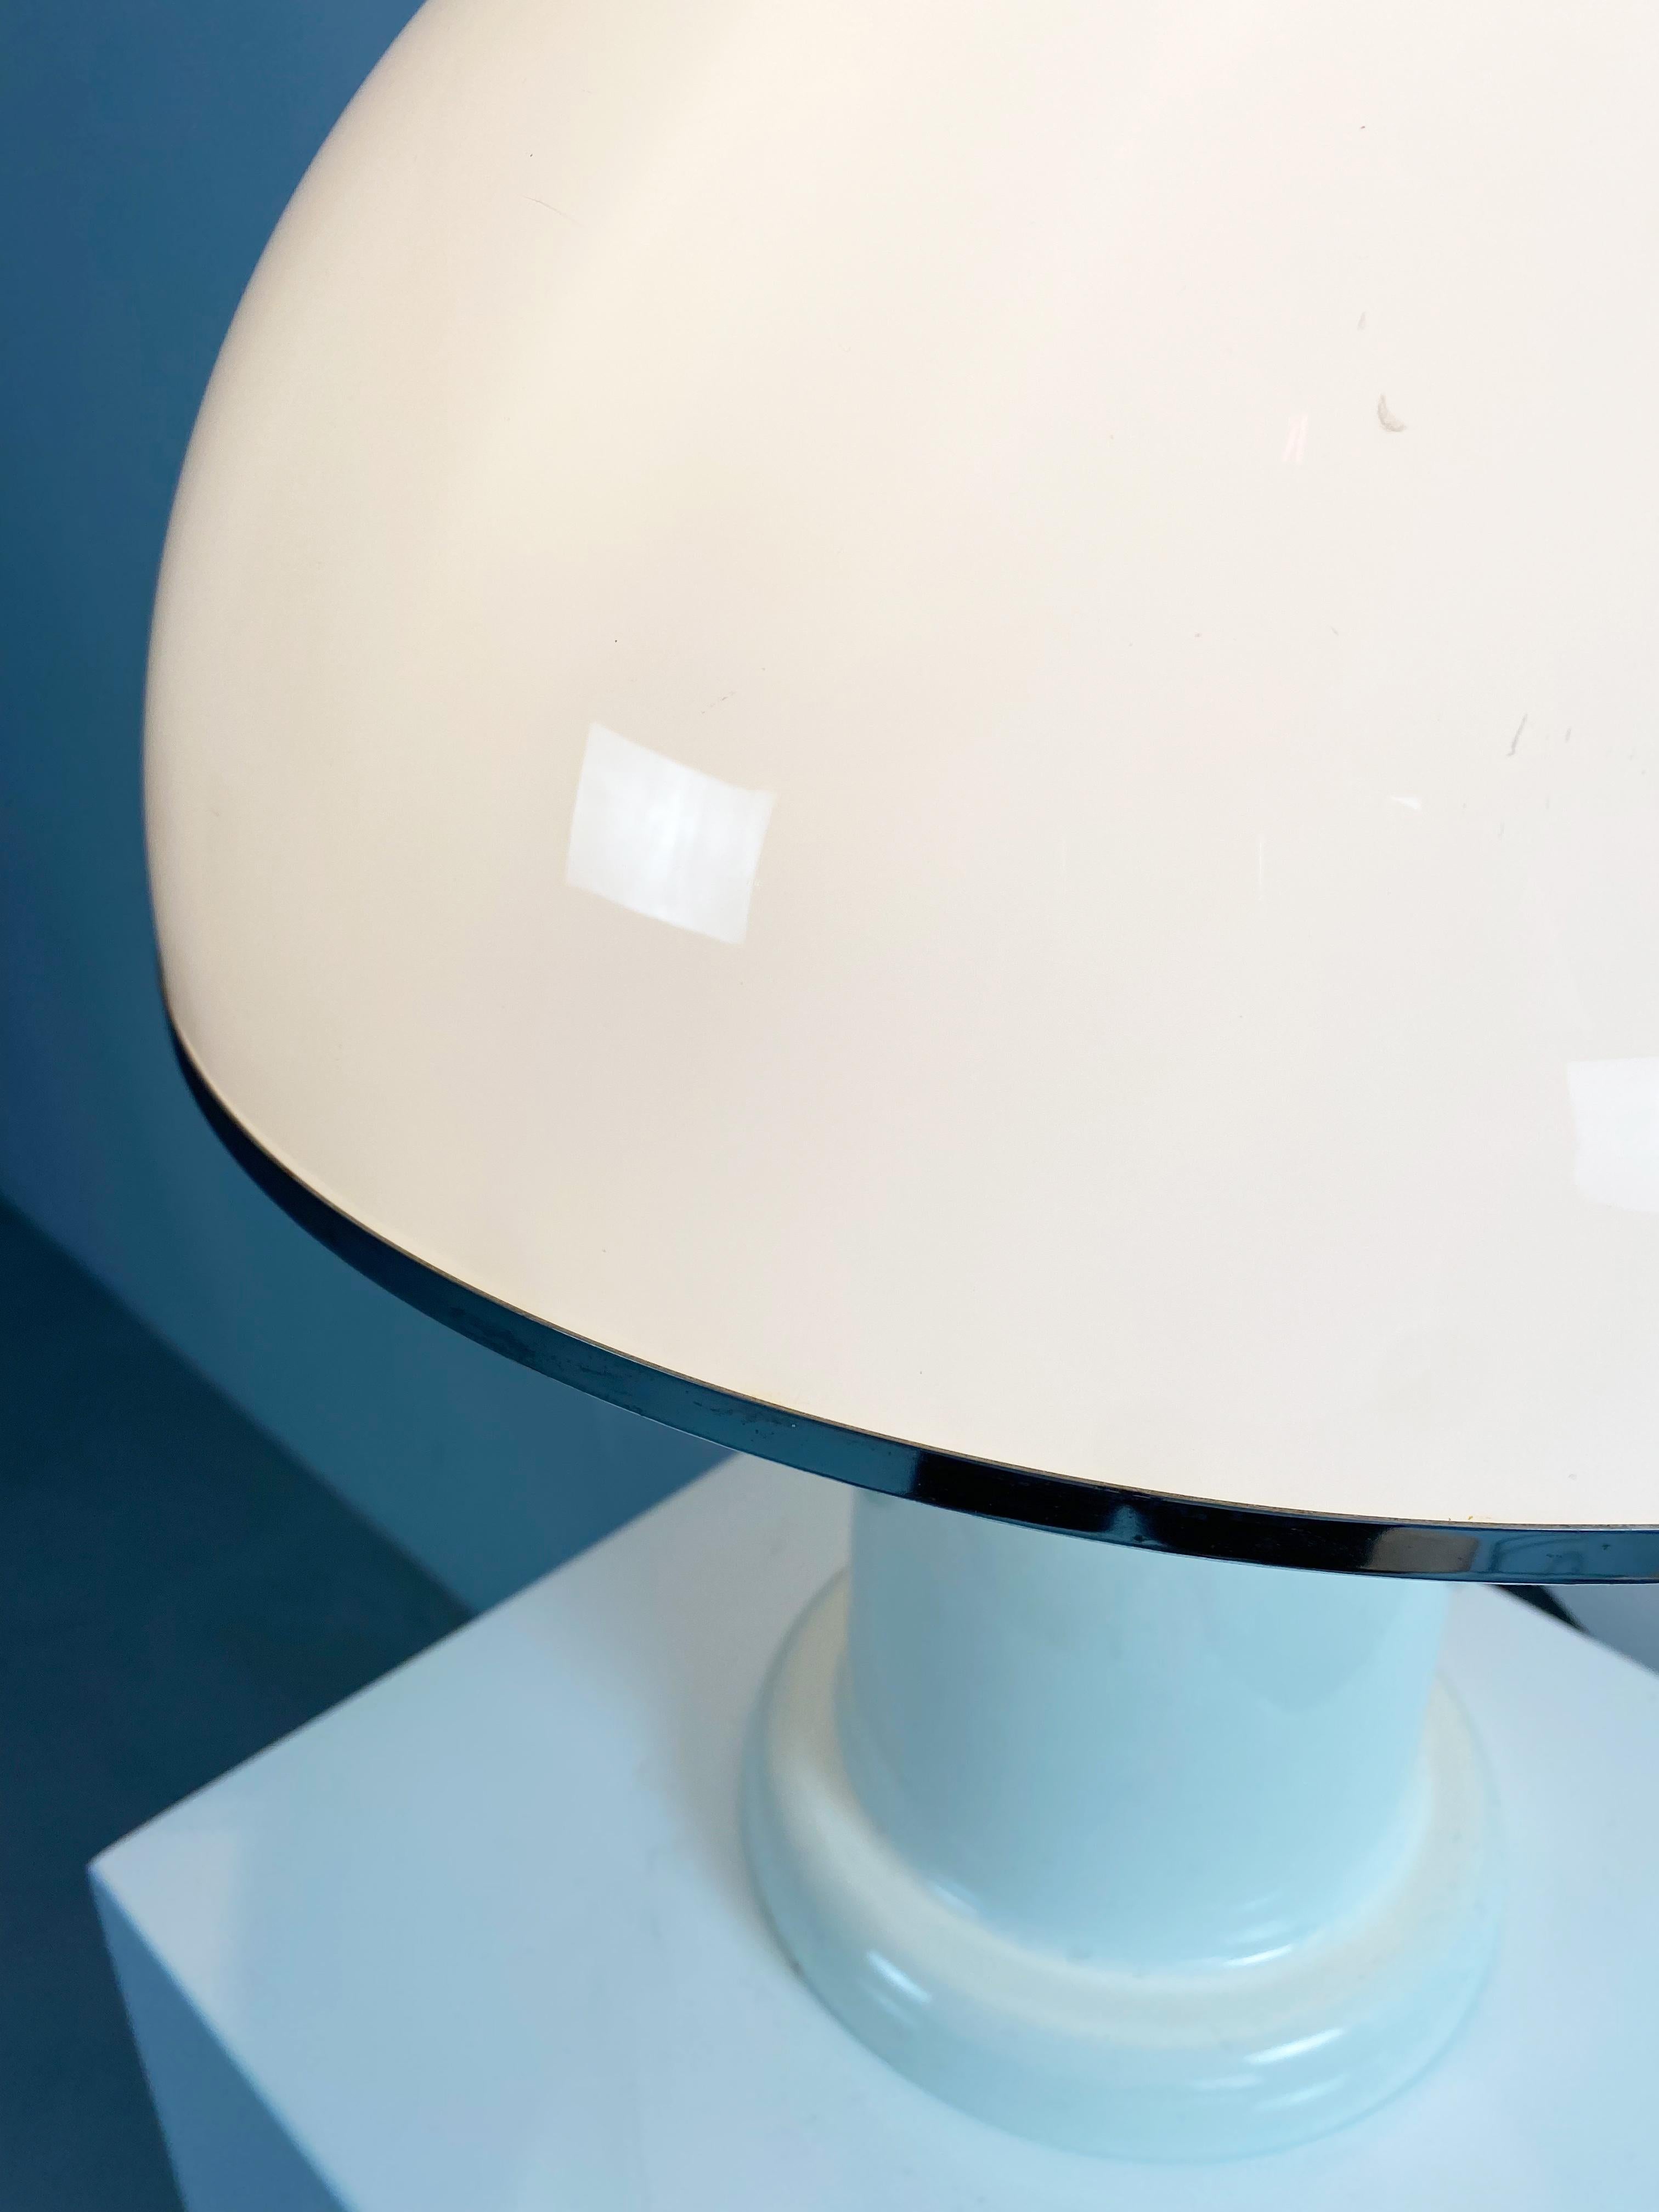 Large Plexiglass Mushroom Table Lamp by Groupe Habitat, France, c.1970 In Good Condition For Sale In Surbiton, GB